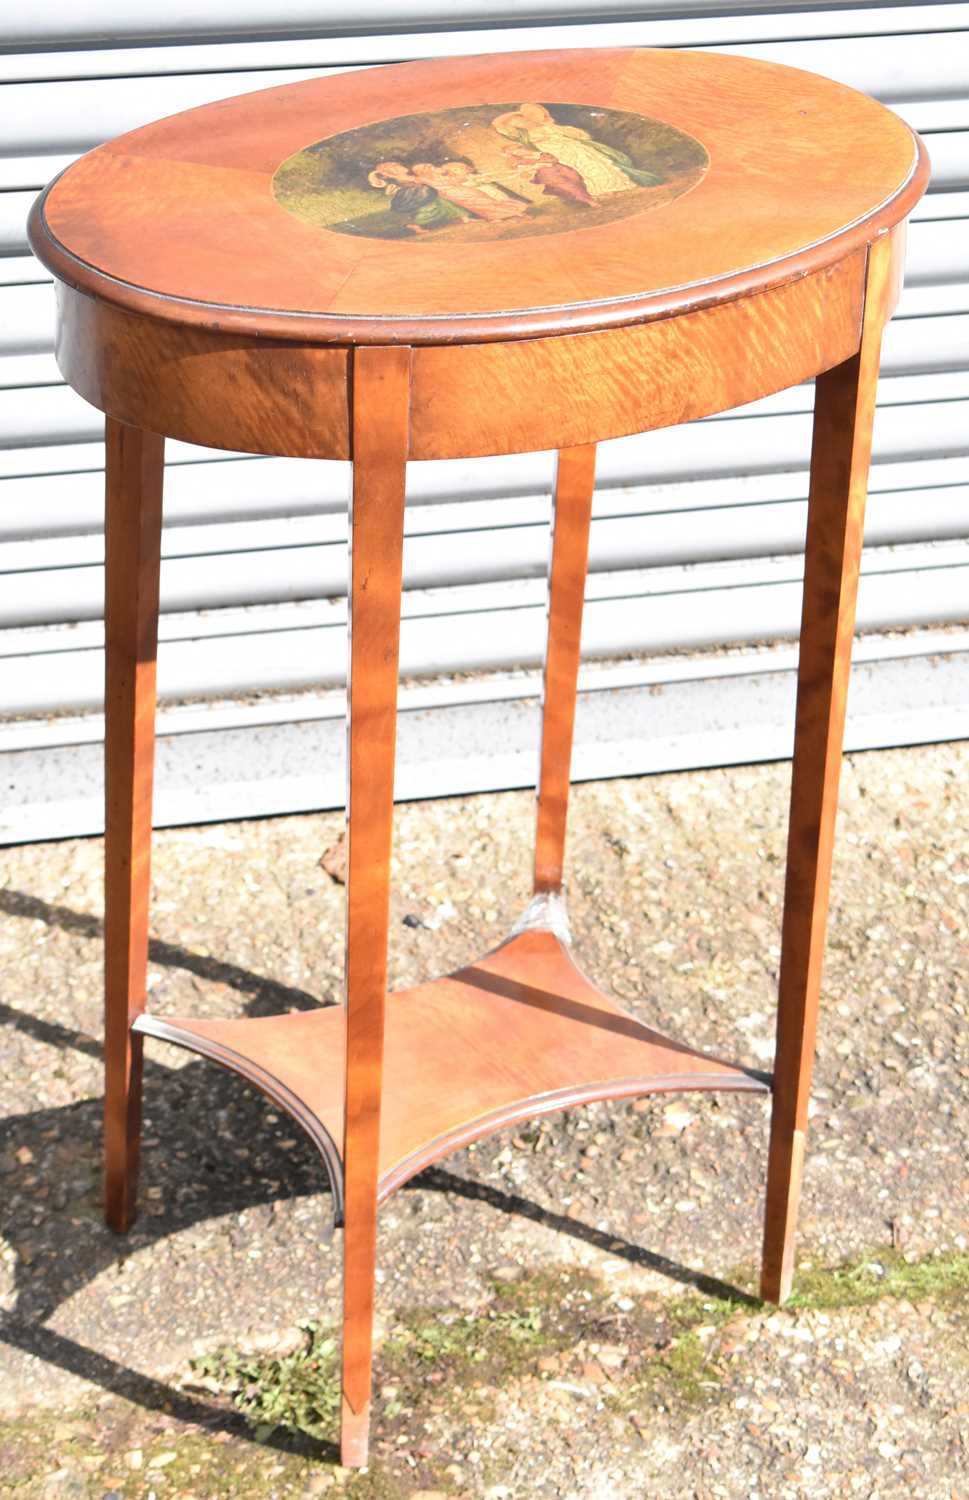 A 19th century sewing table with painted top (possibly bird's eye maple), 73 cms high, 53 cms wide